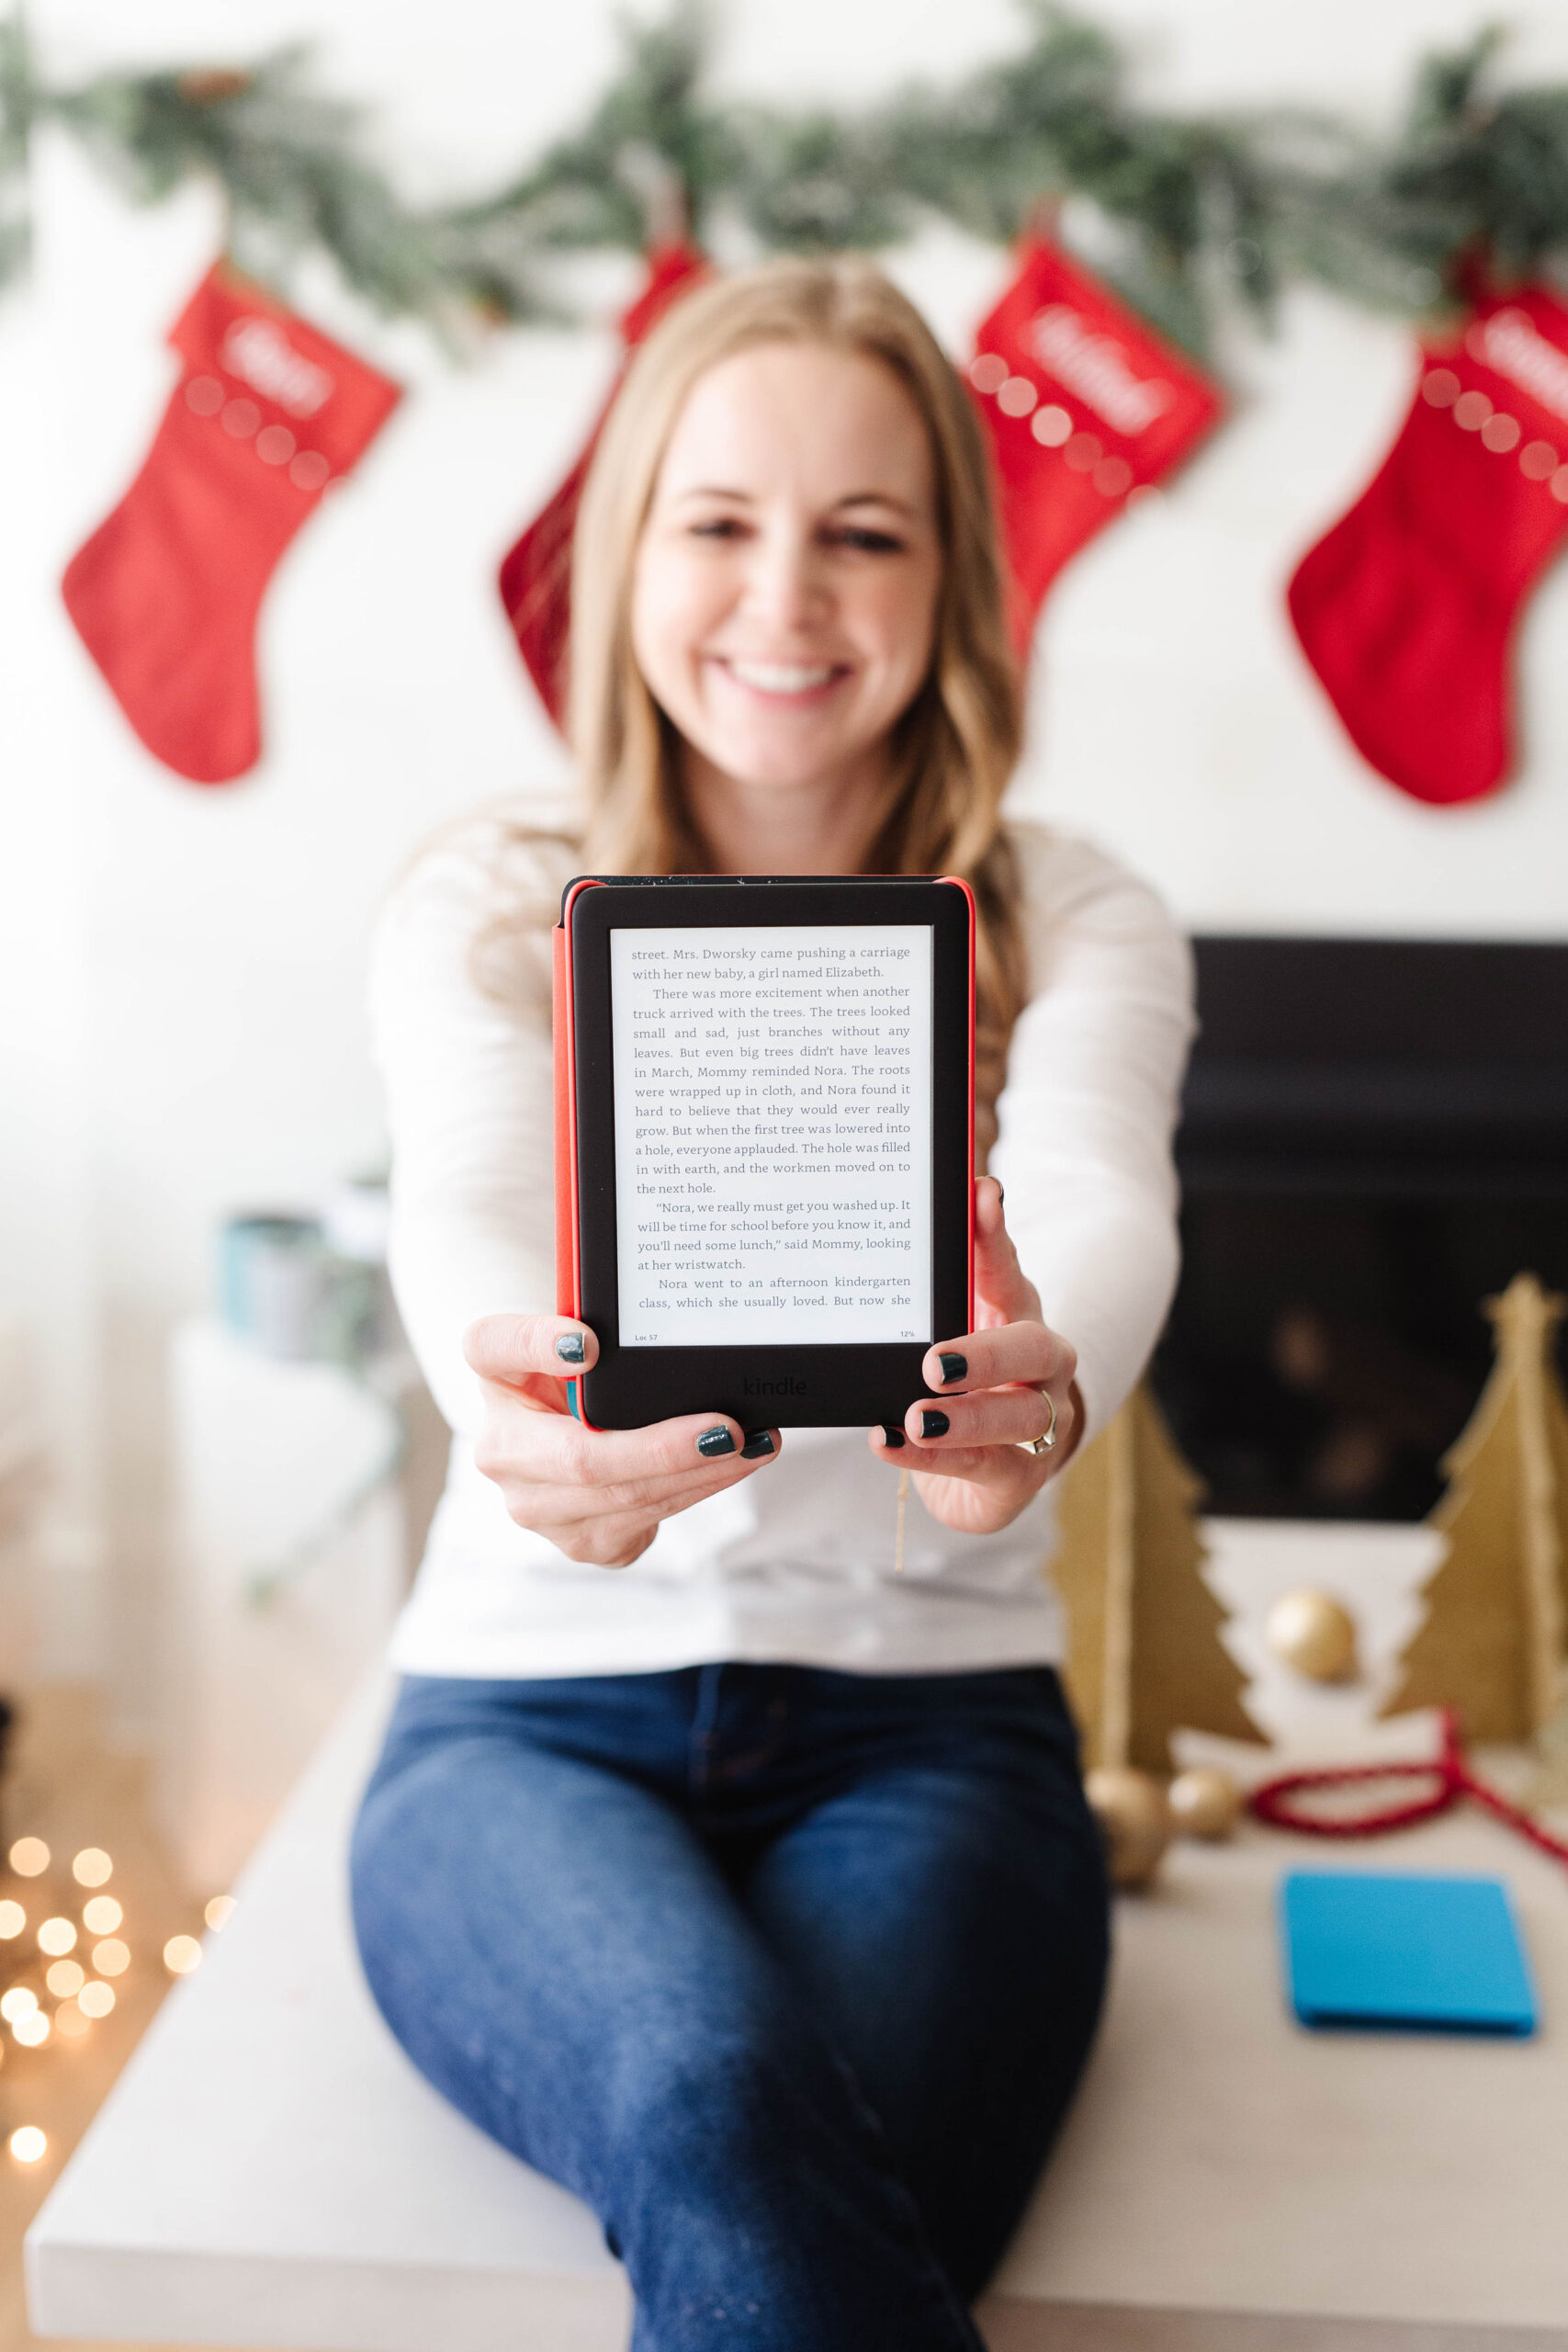 how to gift a kindle book